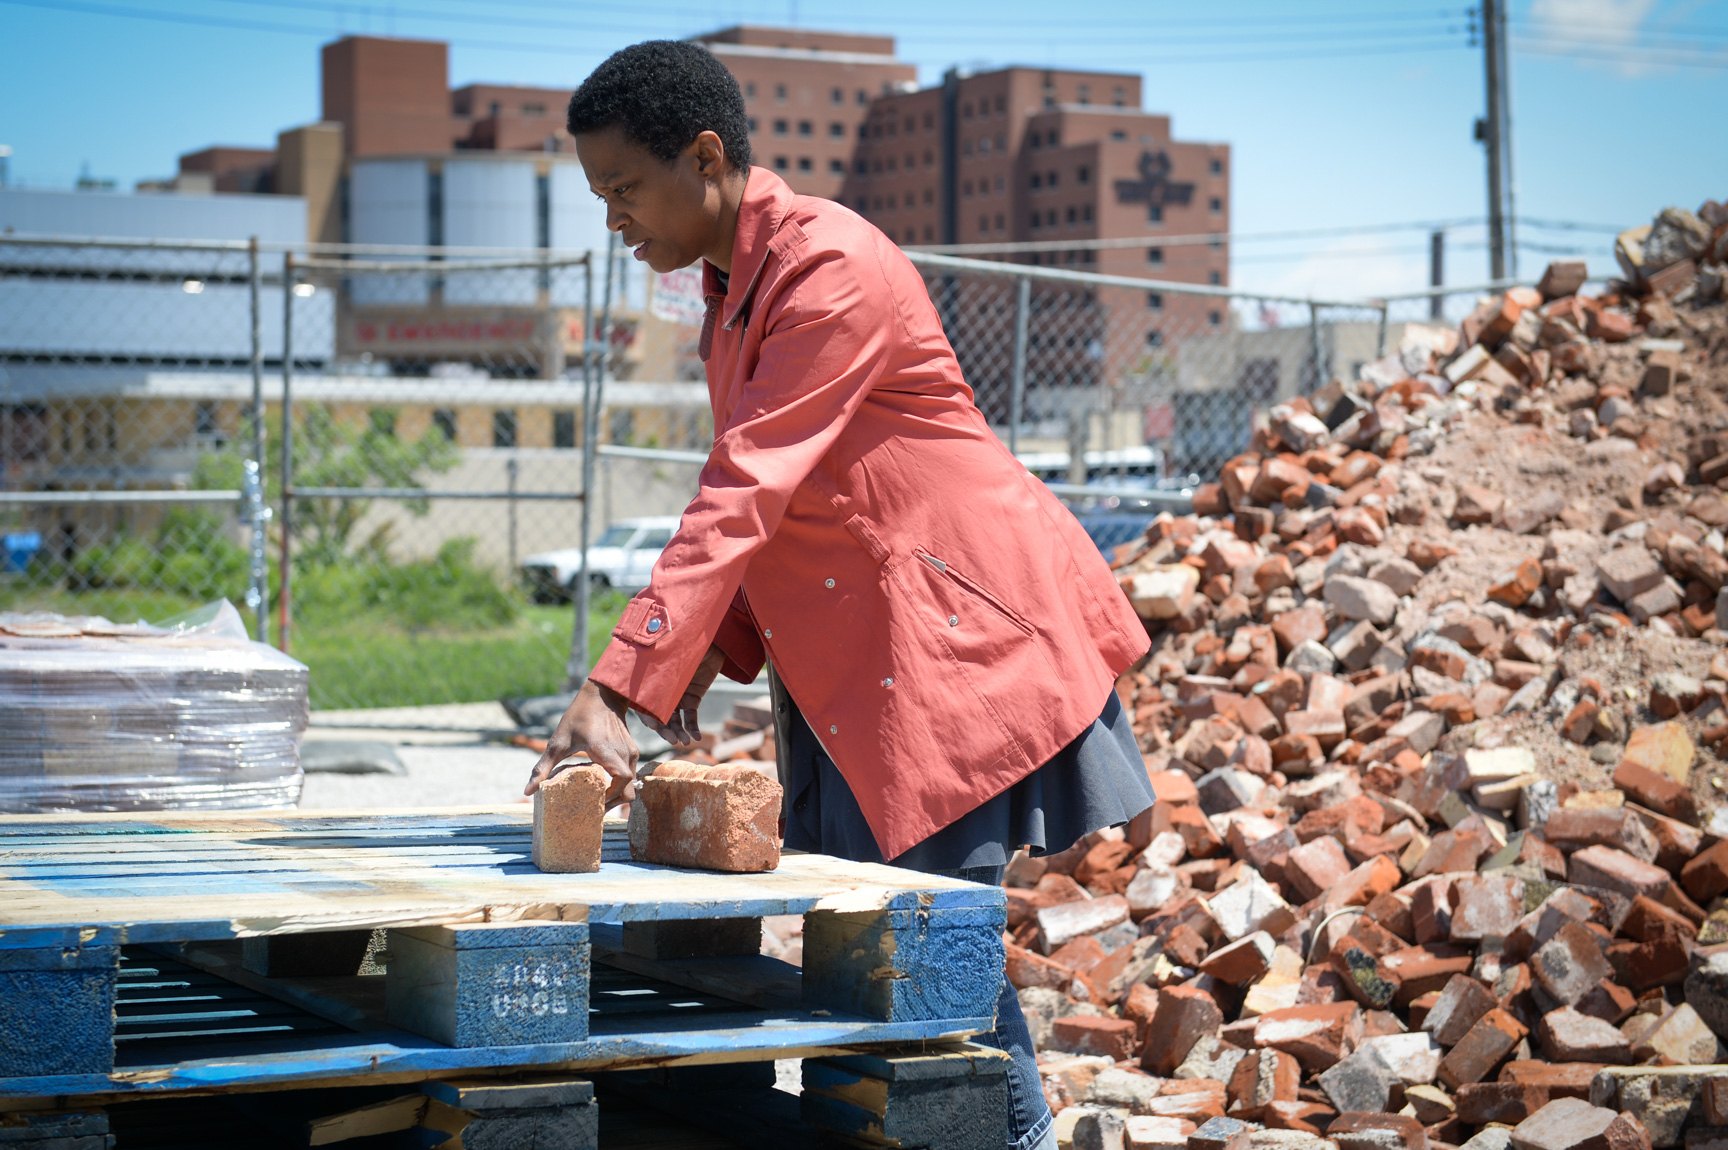 Amanda Williams places a brick on a stack of blue pallets with a large heap of bricks in the background.